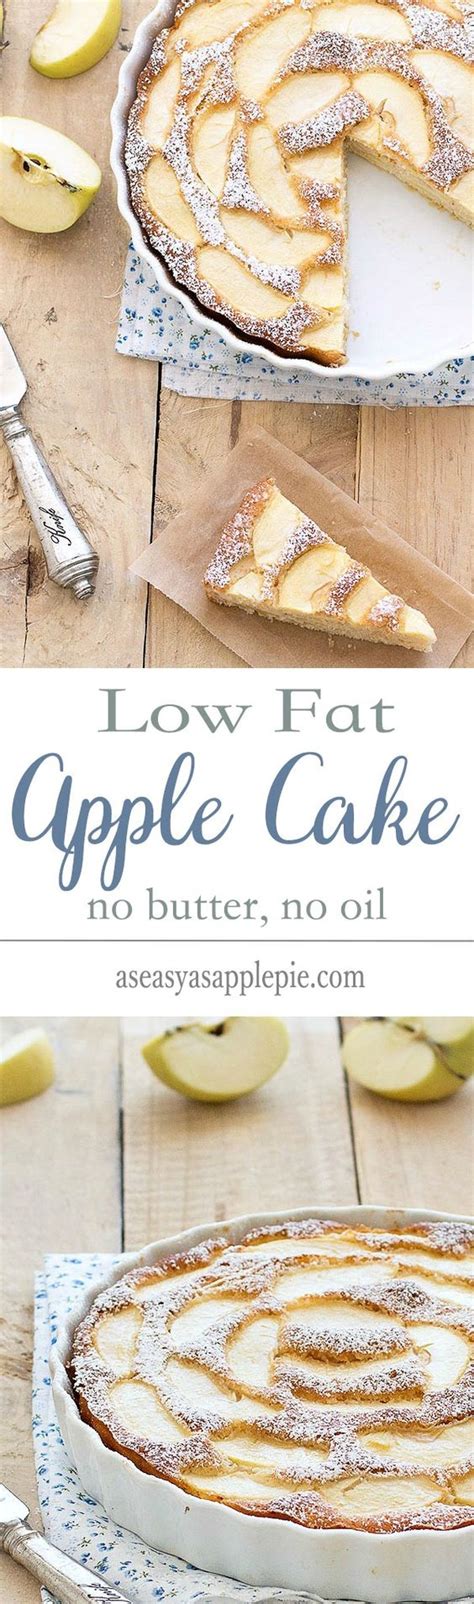 All under 150 calories & they contain no eggs, butter, artificial ingredients, refined flour or sugar! Low Fat Apple Cake | Recipe | Follow me, Dairy and Cakes